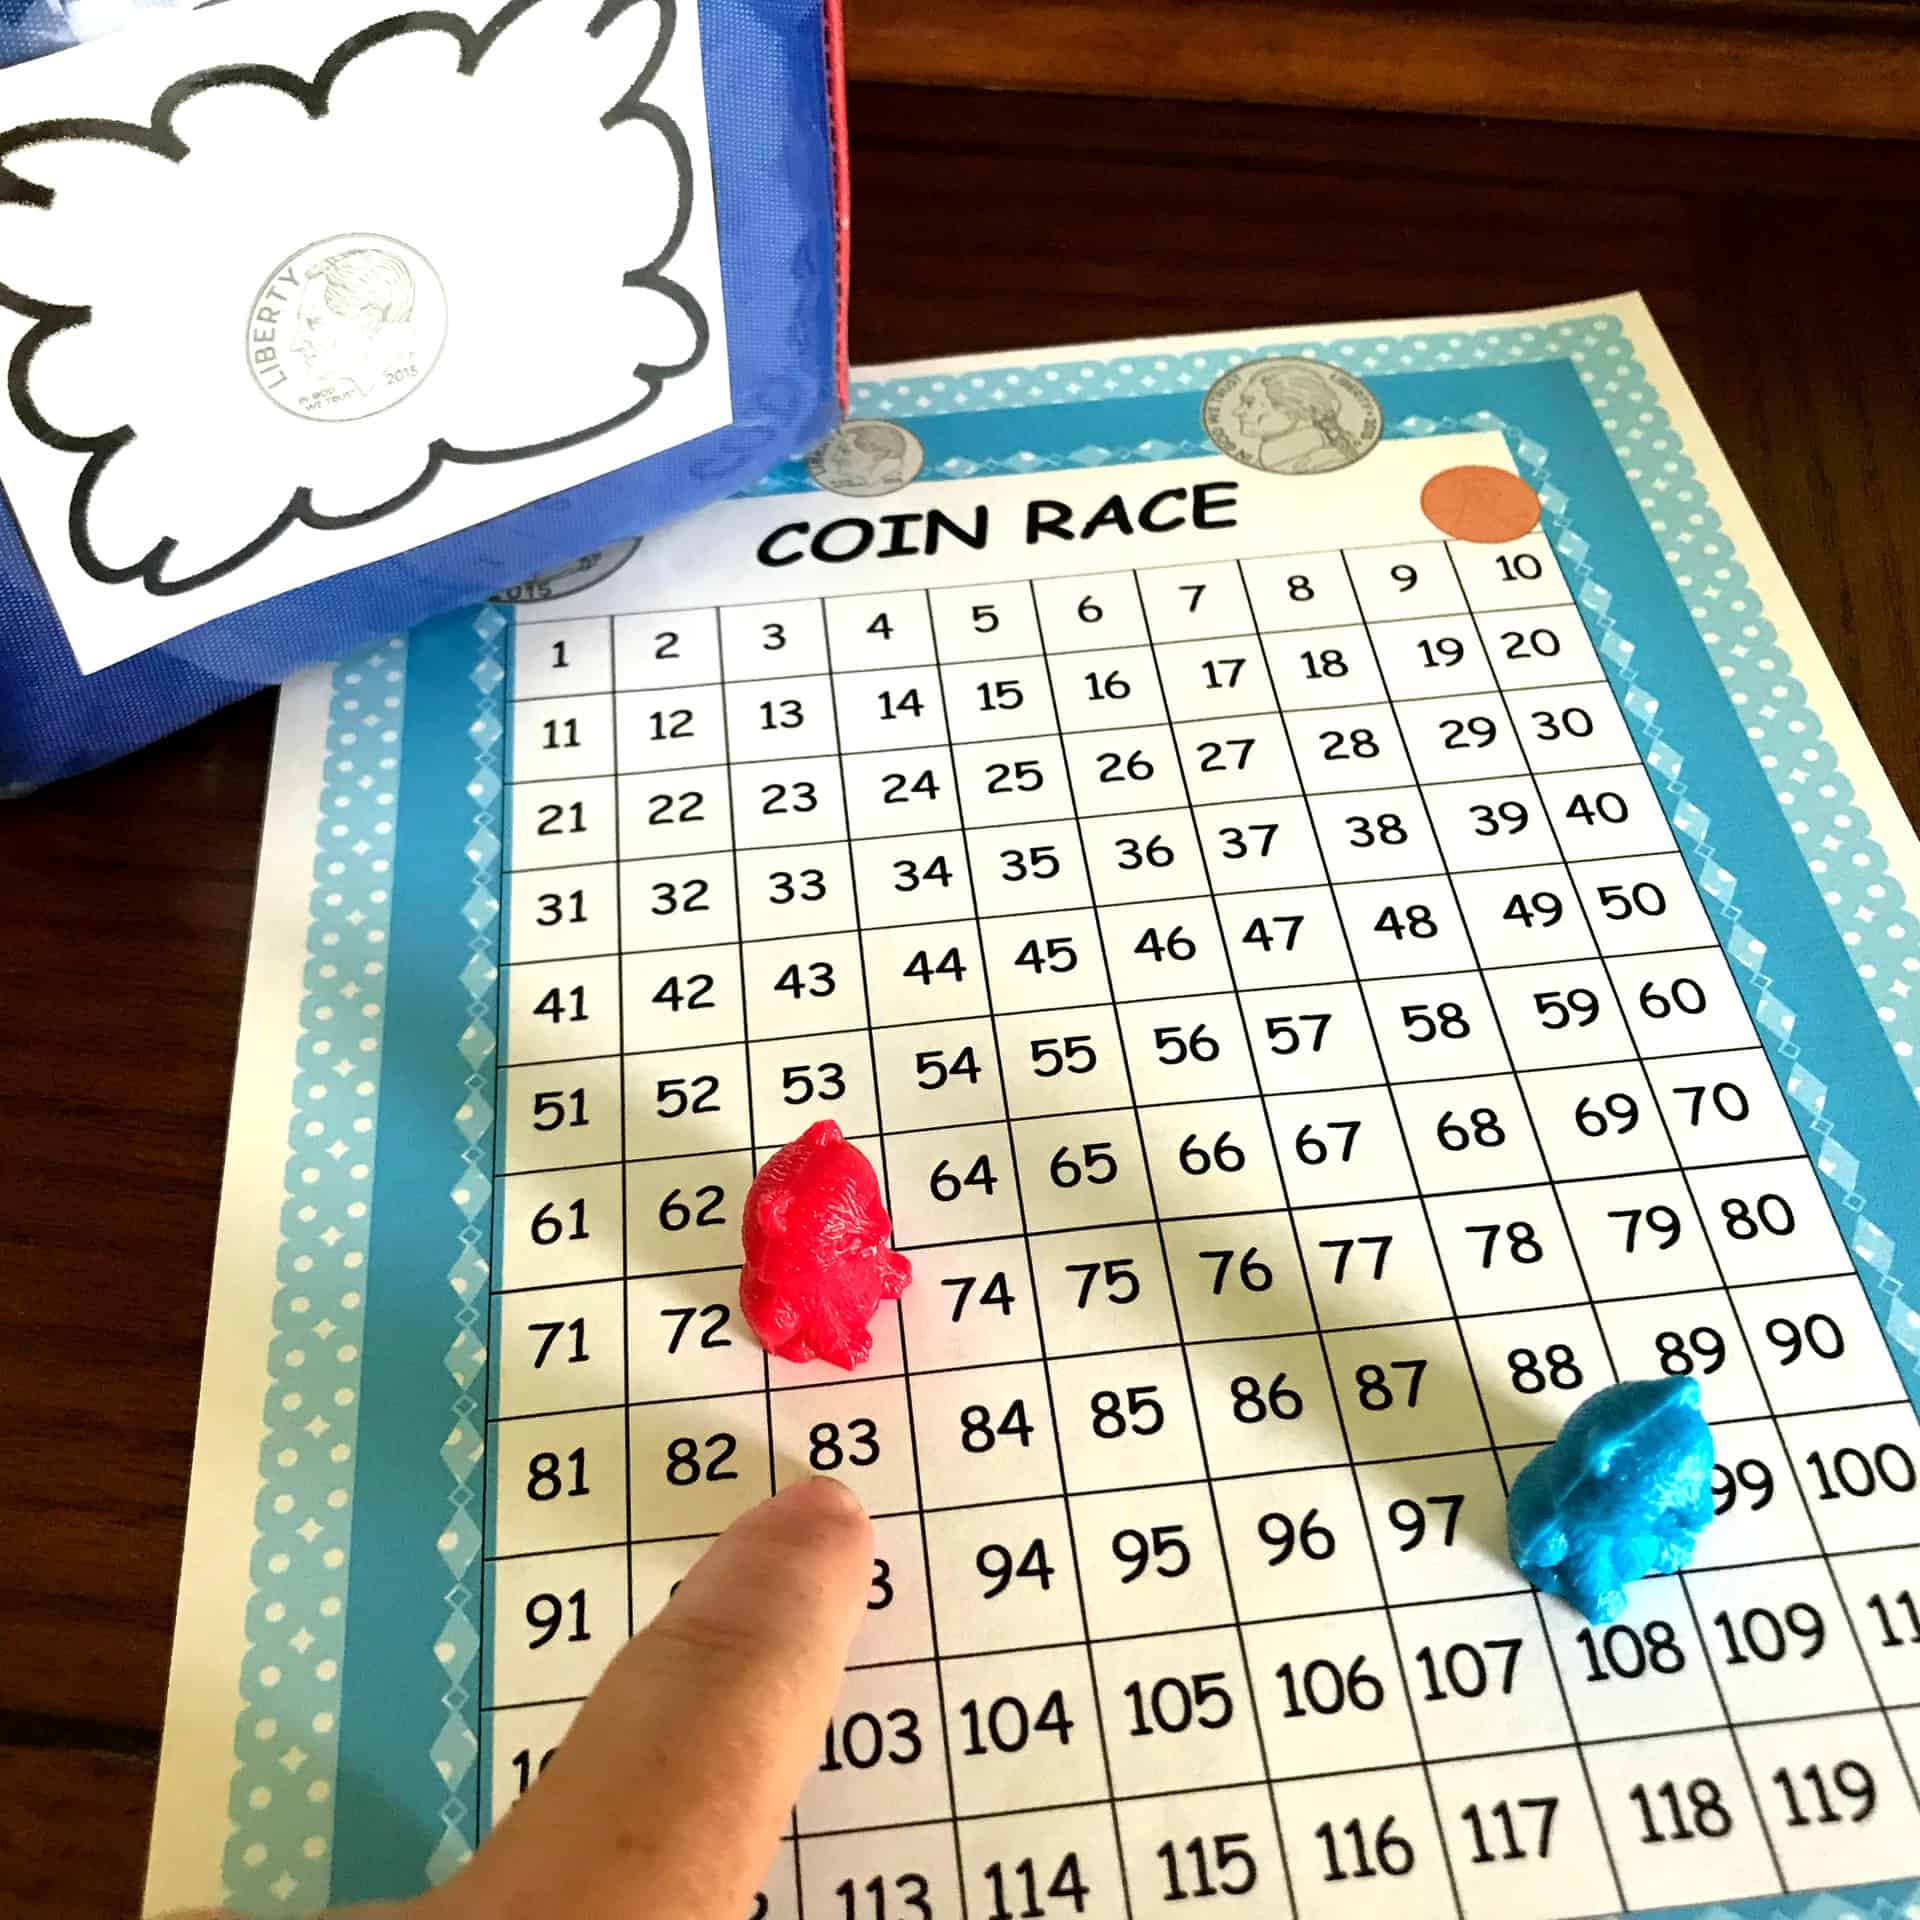 Coin recognition game printable shown with two dice.